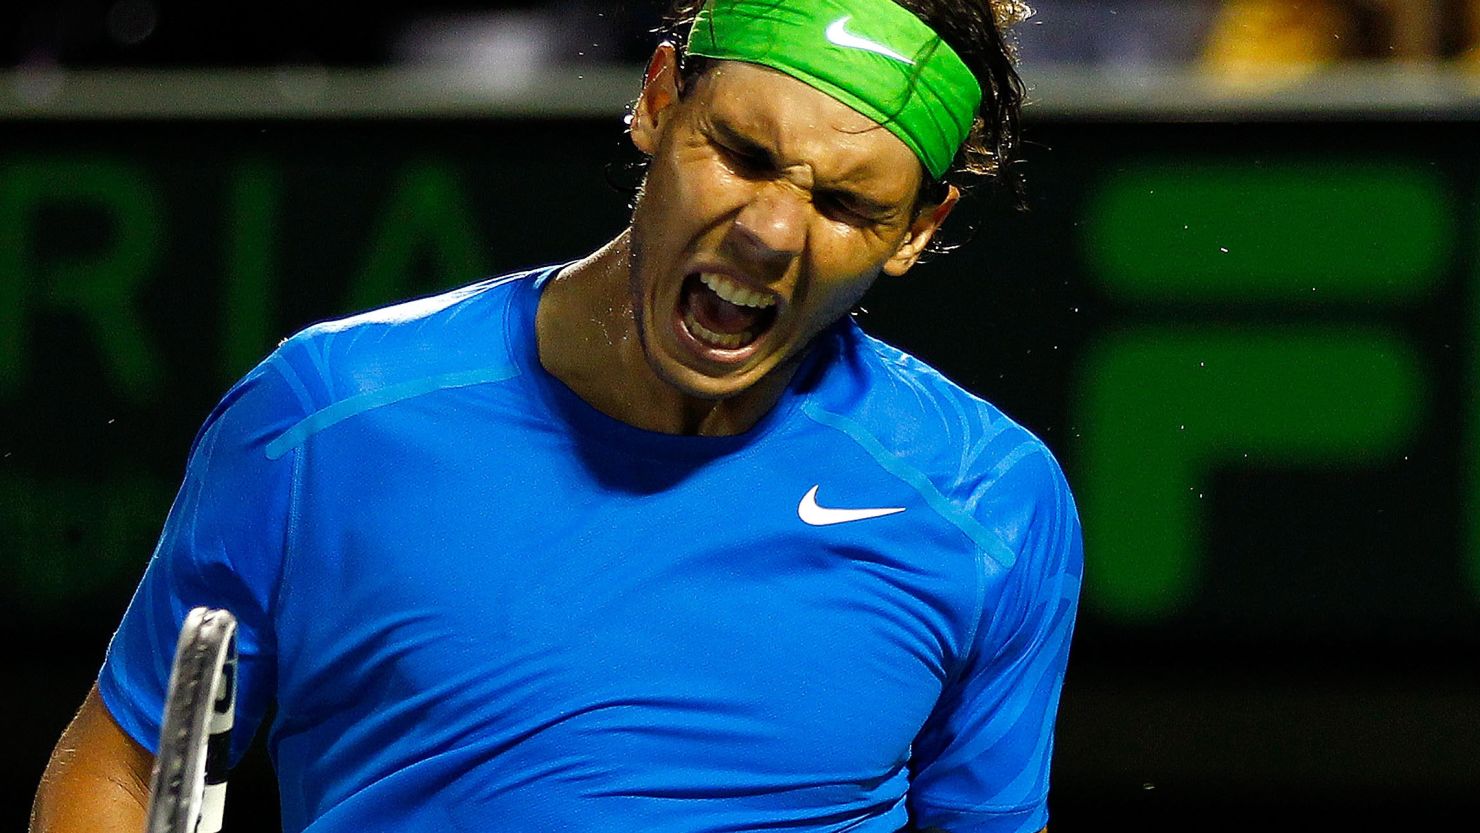 Rafael Nadal shows his delight after overcoming Jo-Wilfried Tsonga at Crandon Park in Key Biscayne.